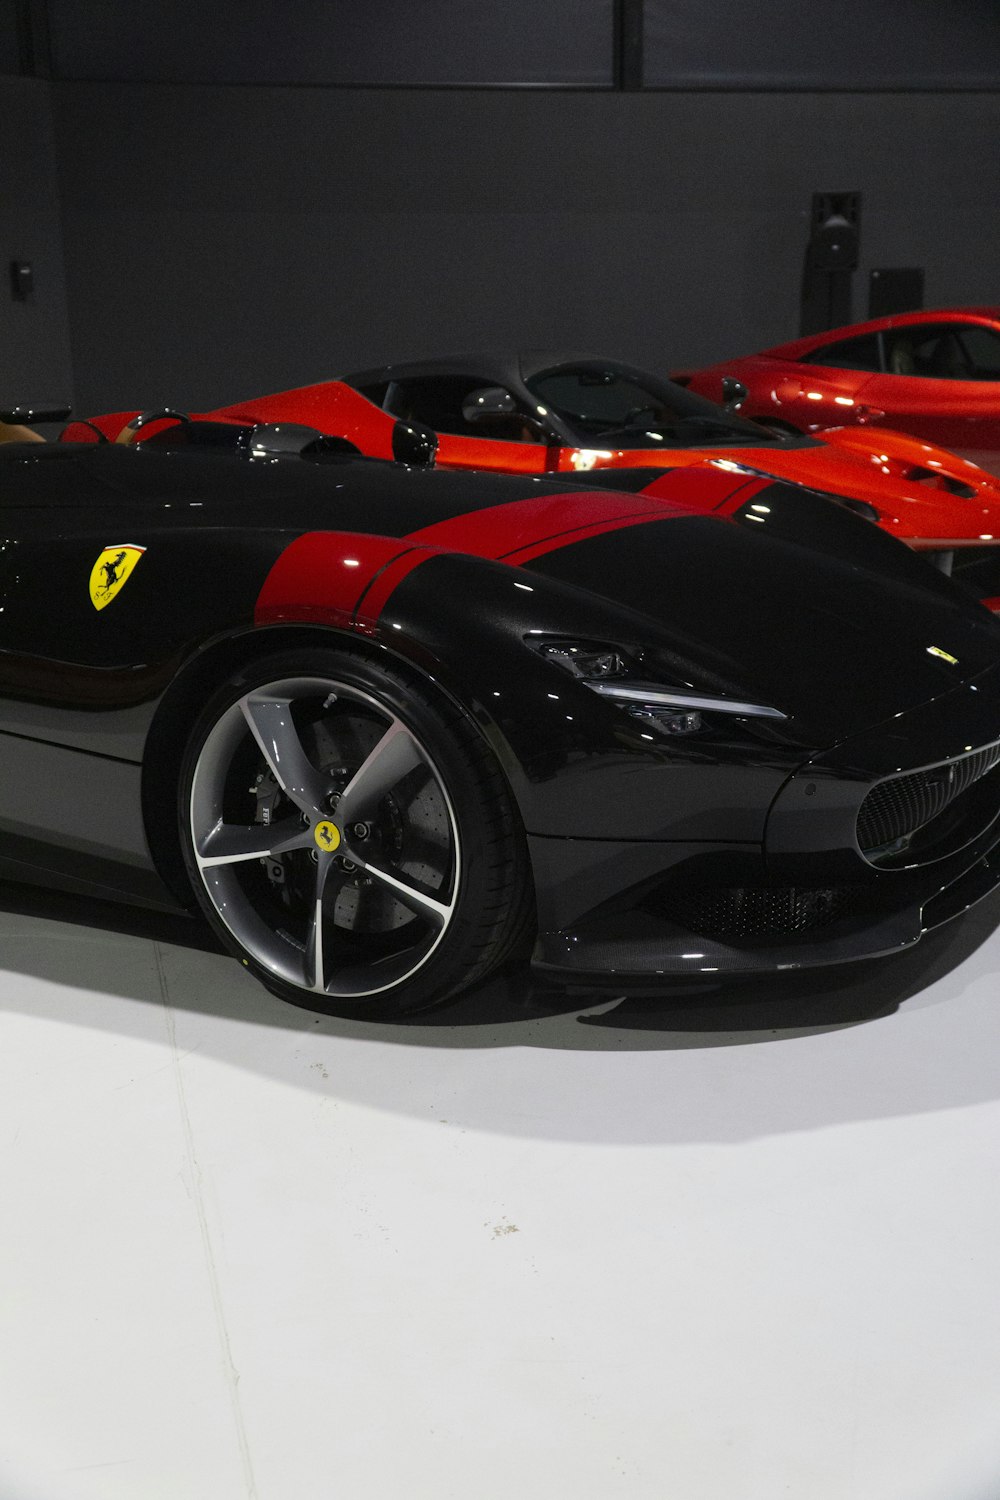 a black and red sports car is on display